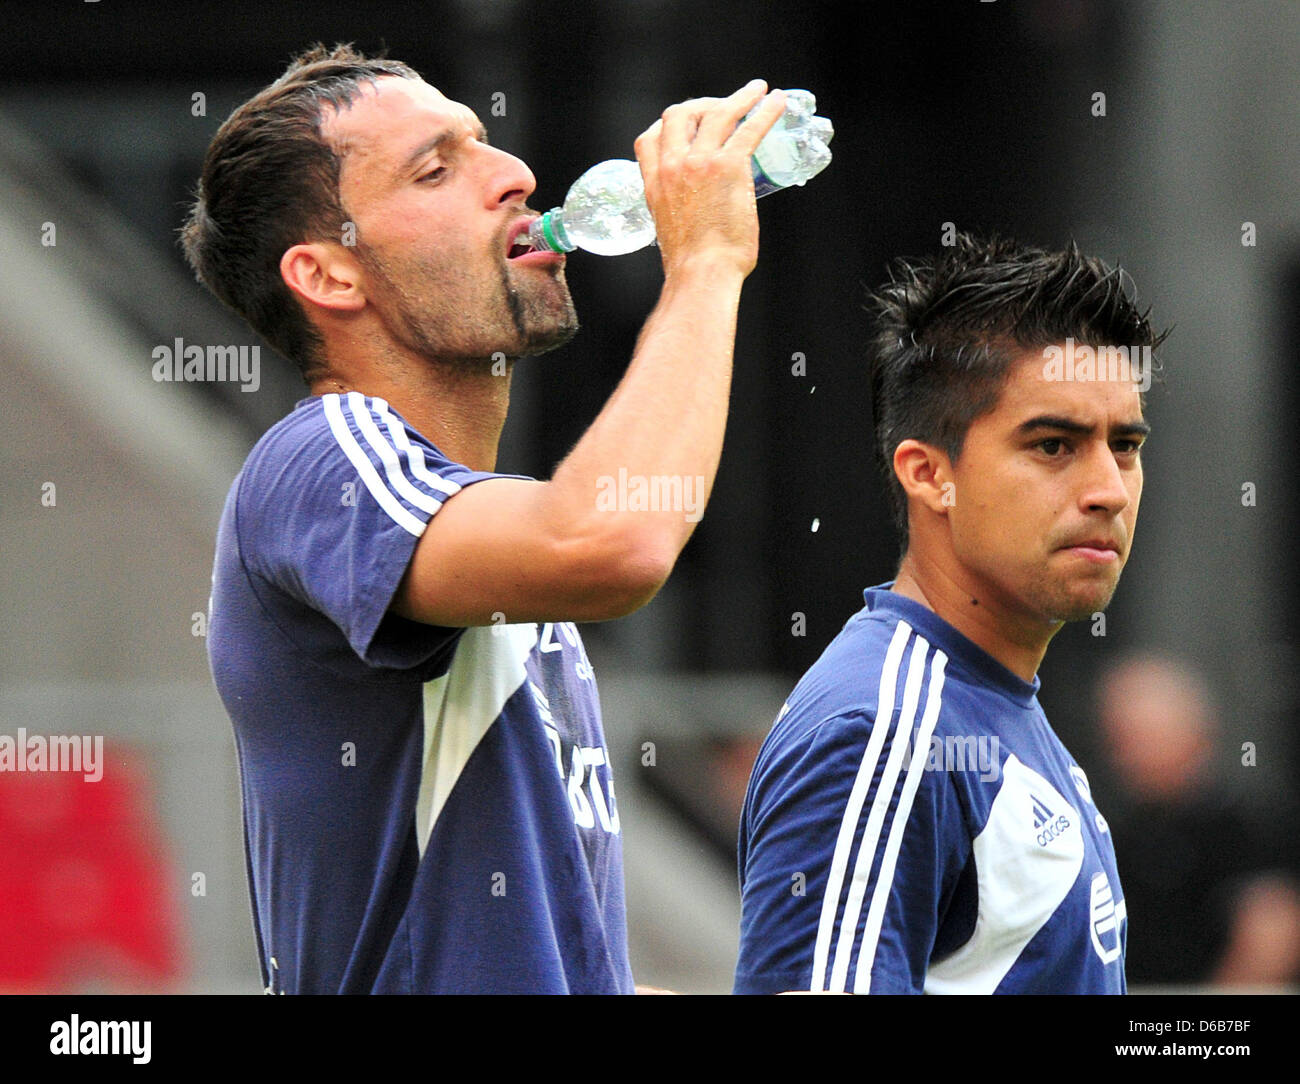 Dynamo Moscow's Kevin Kuranyi (L) and Christian Noboa practices at the Mercedes Benz Arena in Stuttgart, Germany, 21 August 2012. VfB Stuttgart will play Dynamo Moscow in the first leg of the fourth round of the qualifications for the Europa League on 22 August 2012. Photo: JAN-PHILIPP STROBEL Stock Photo